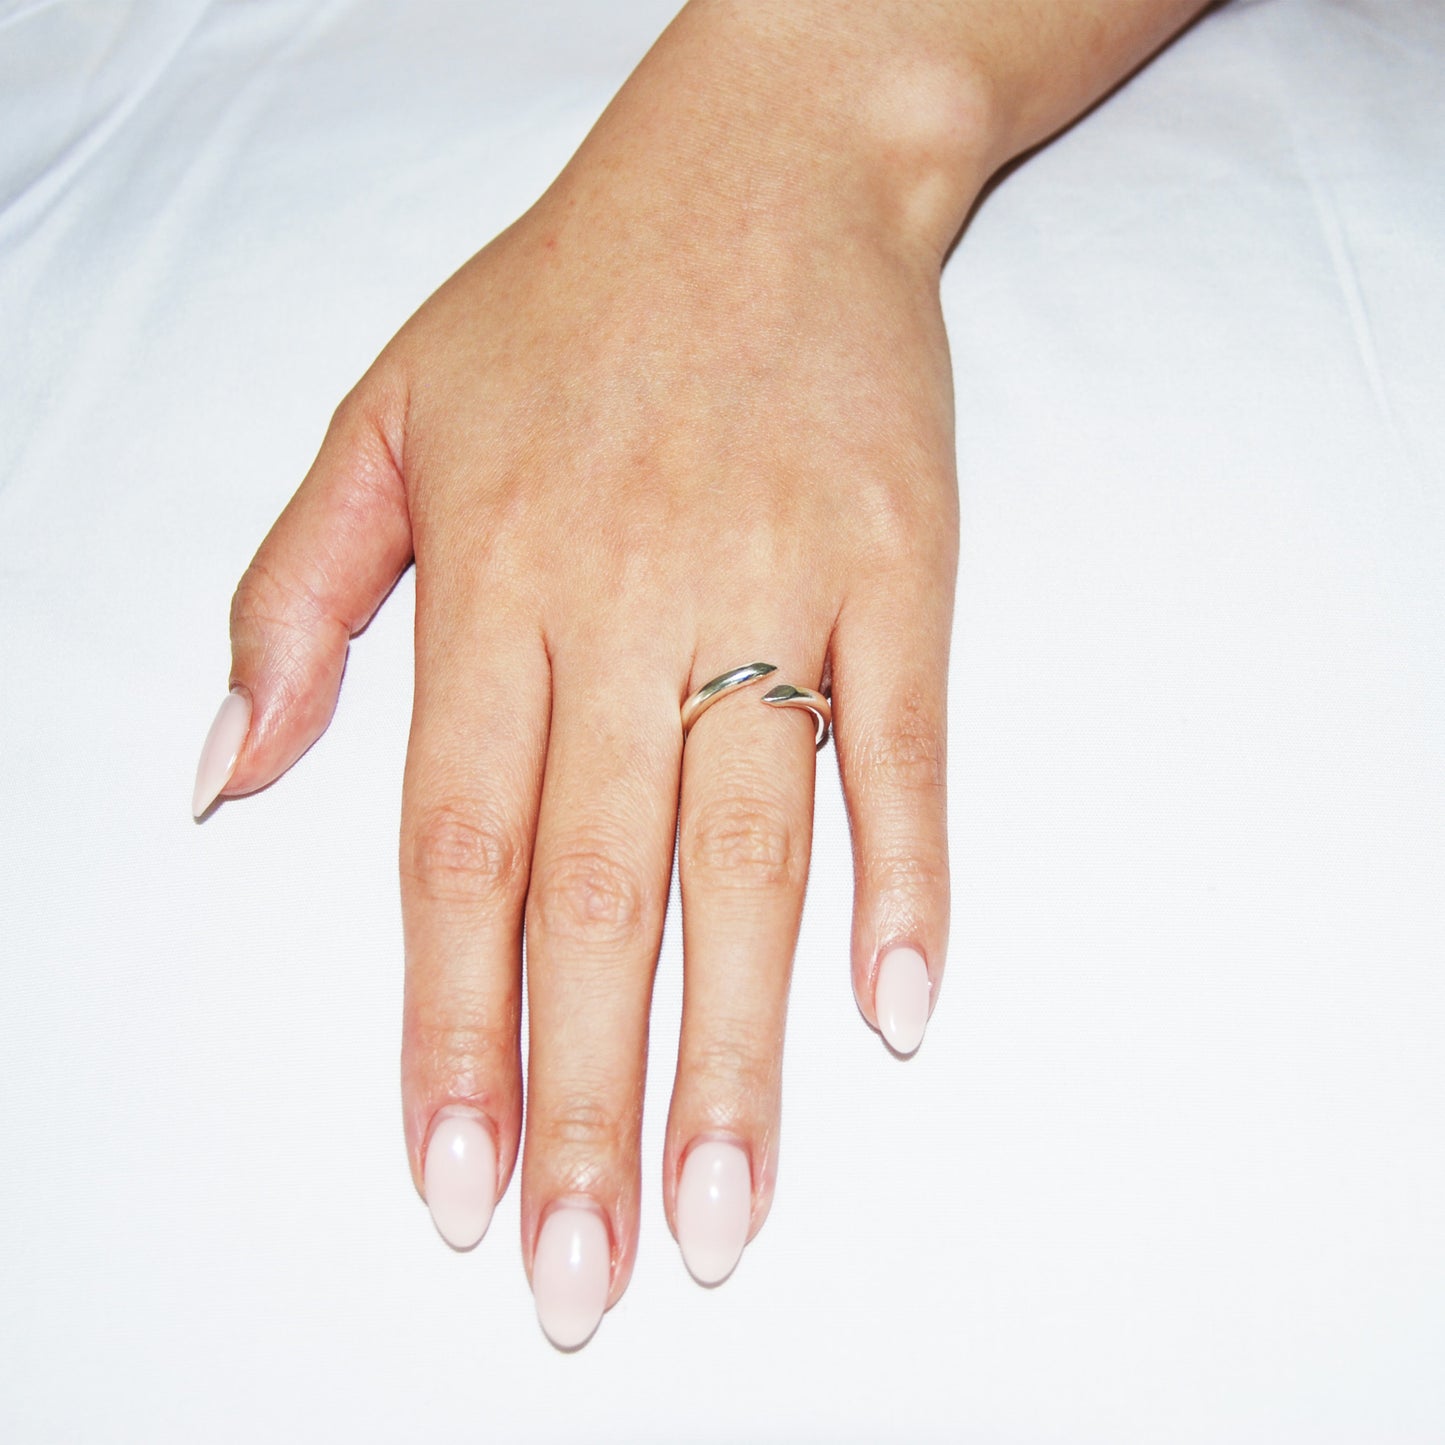 Thin Docile Ring